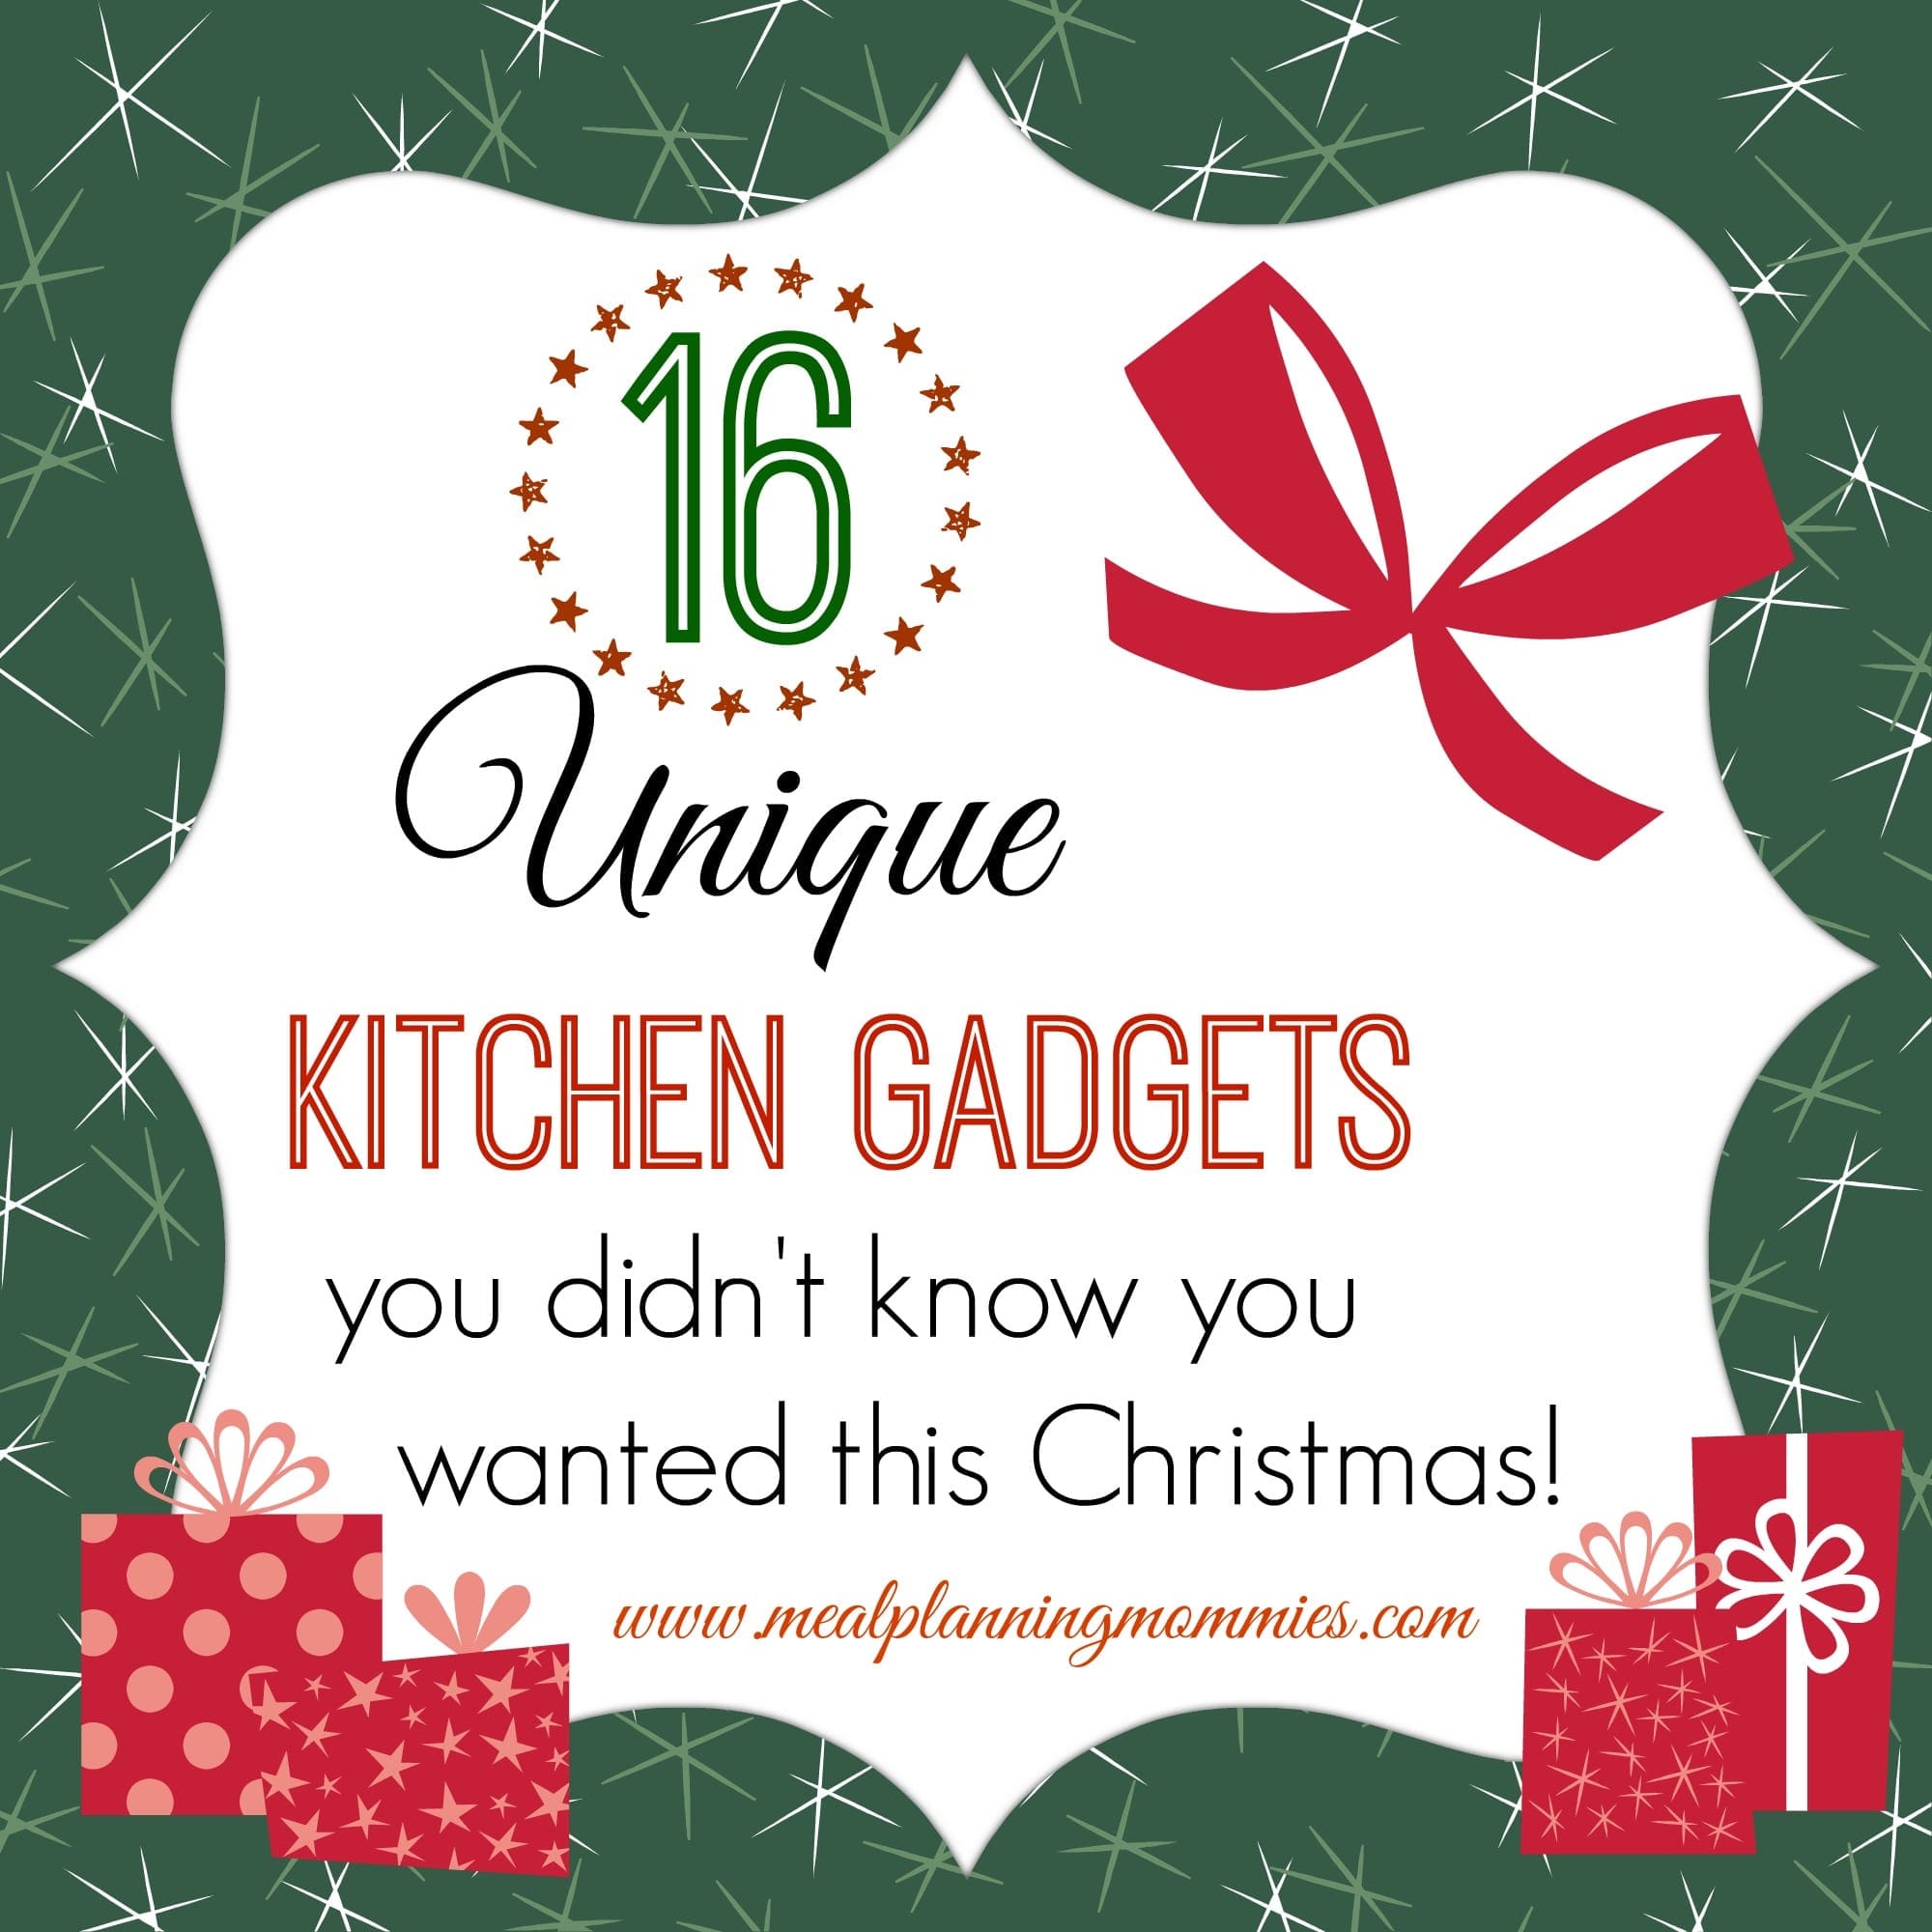 16 Unique Kitchen Gadgets you didn't know you wanted this Christmas